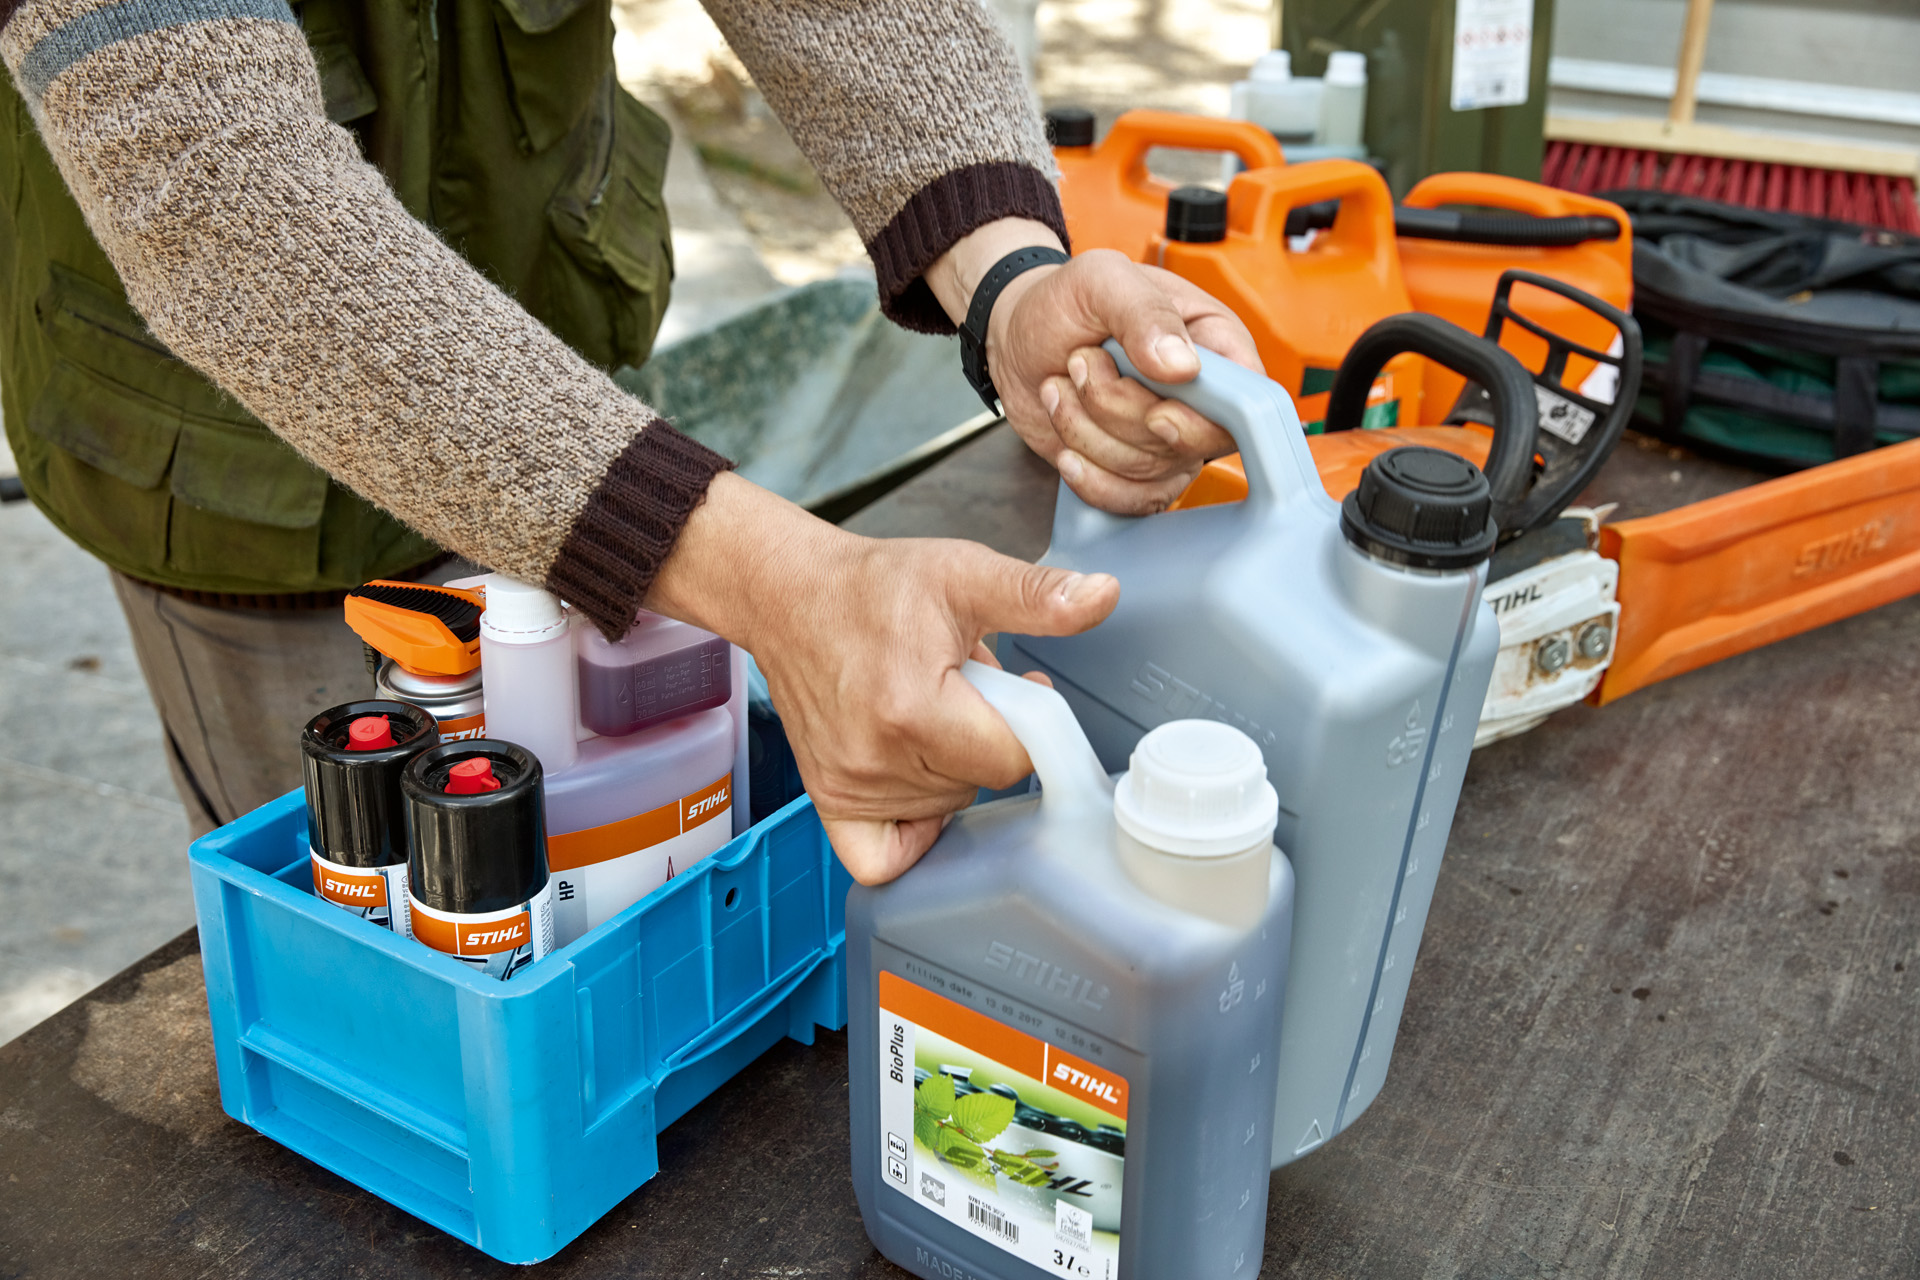 https://www.stihl.de/content/dam/stihl/mediapool/products/oils-and-lubricants,-hand-tools-and-forestry-accessories/oils-and-lubricants/32a87ecaad44483594b2905c8f929f79.jpg